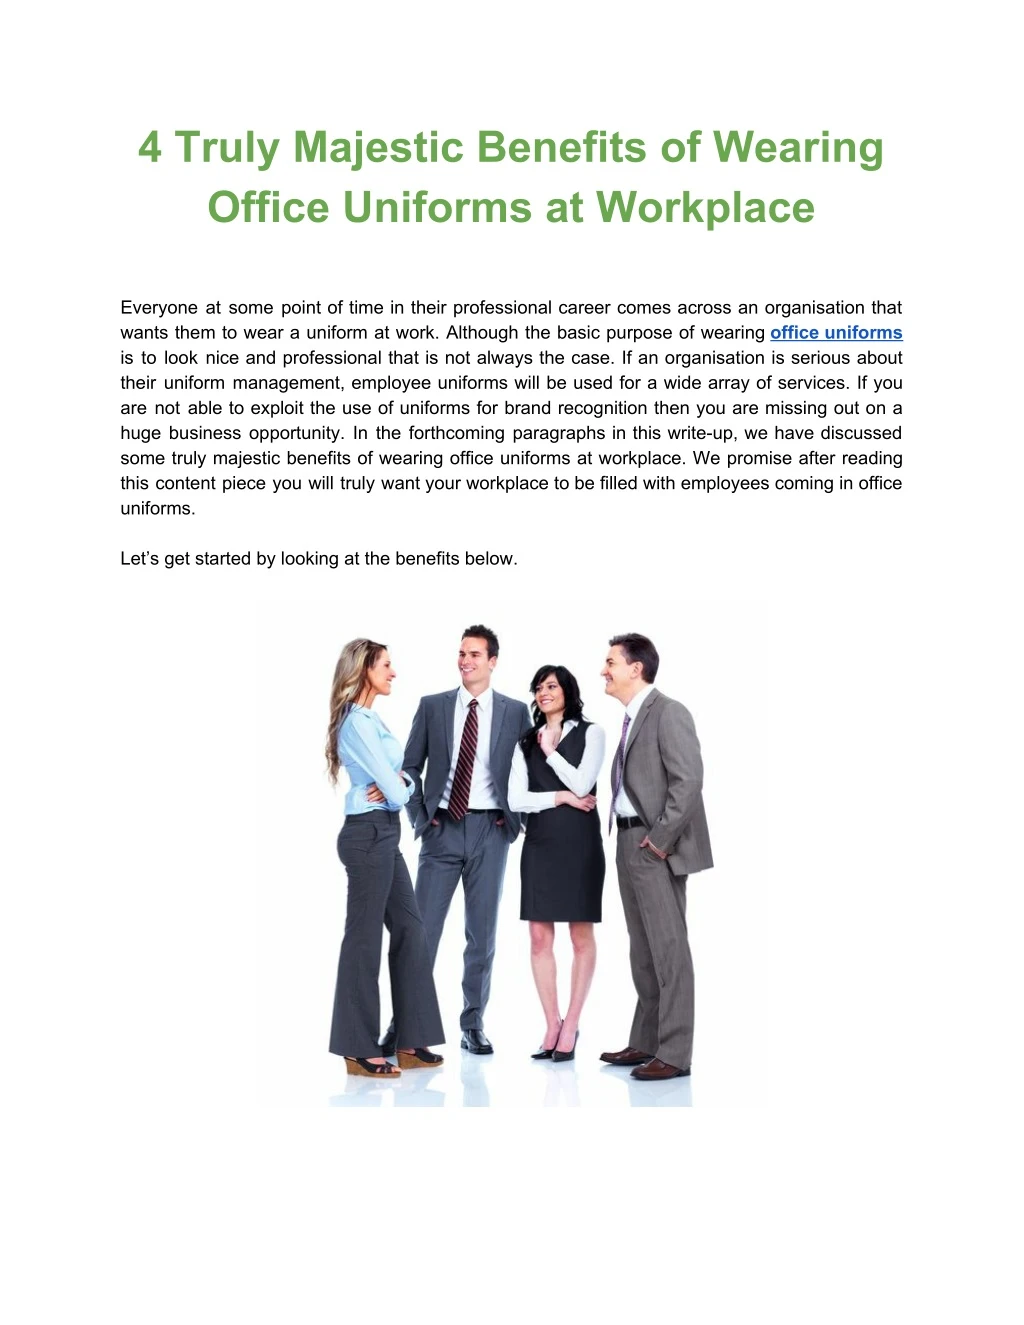 4 truly majestic benefits of wearing office